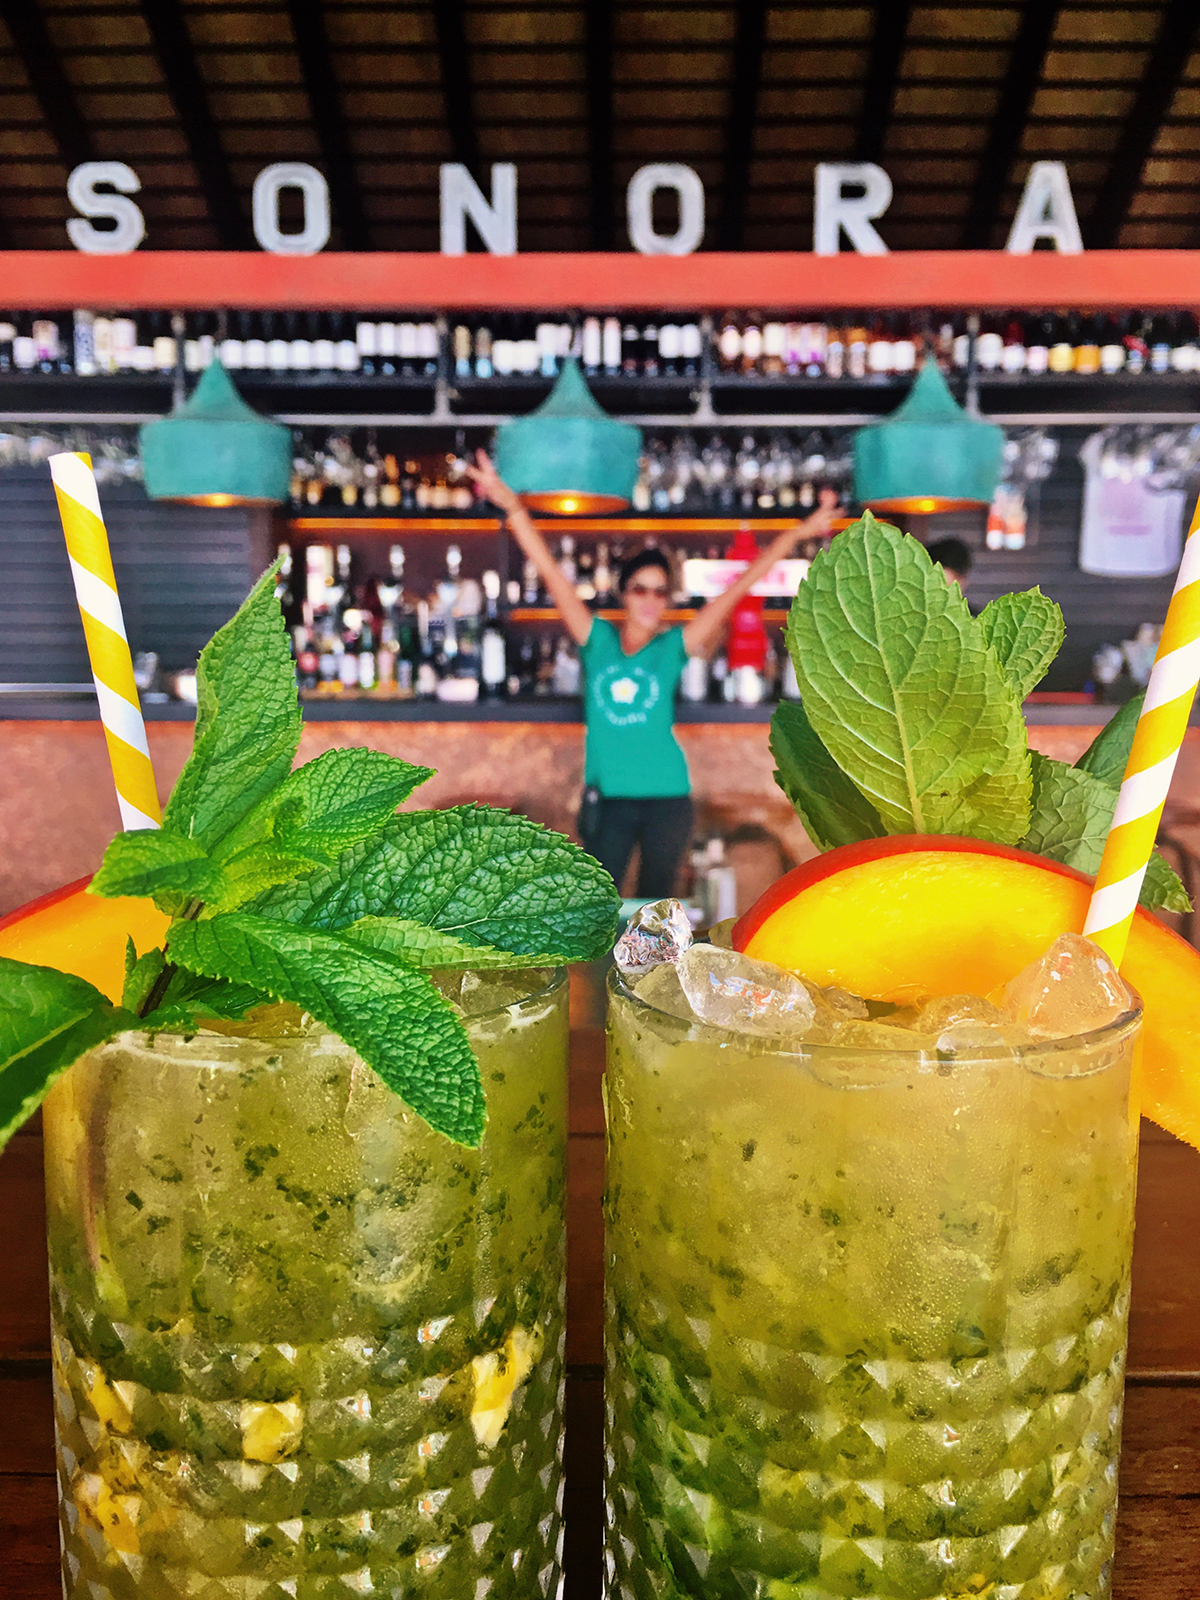 Sonora serve absolutely wonderful cocktails - note the use of paper straws, Sonora prides itself on being environmentally friendly